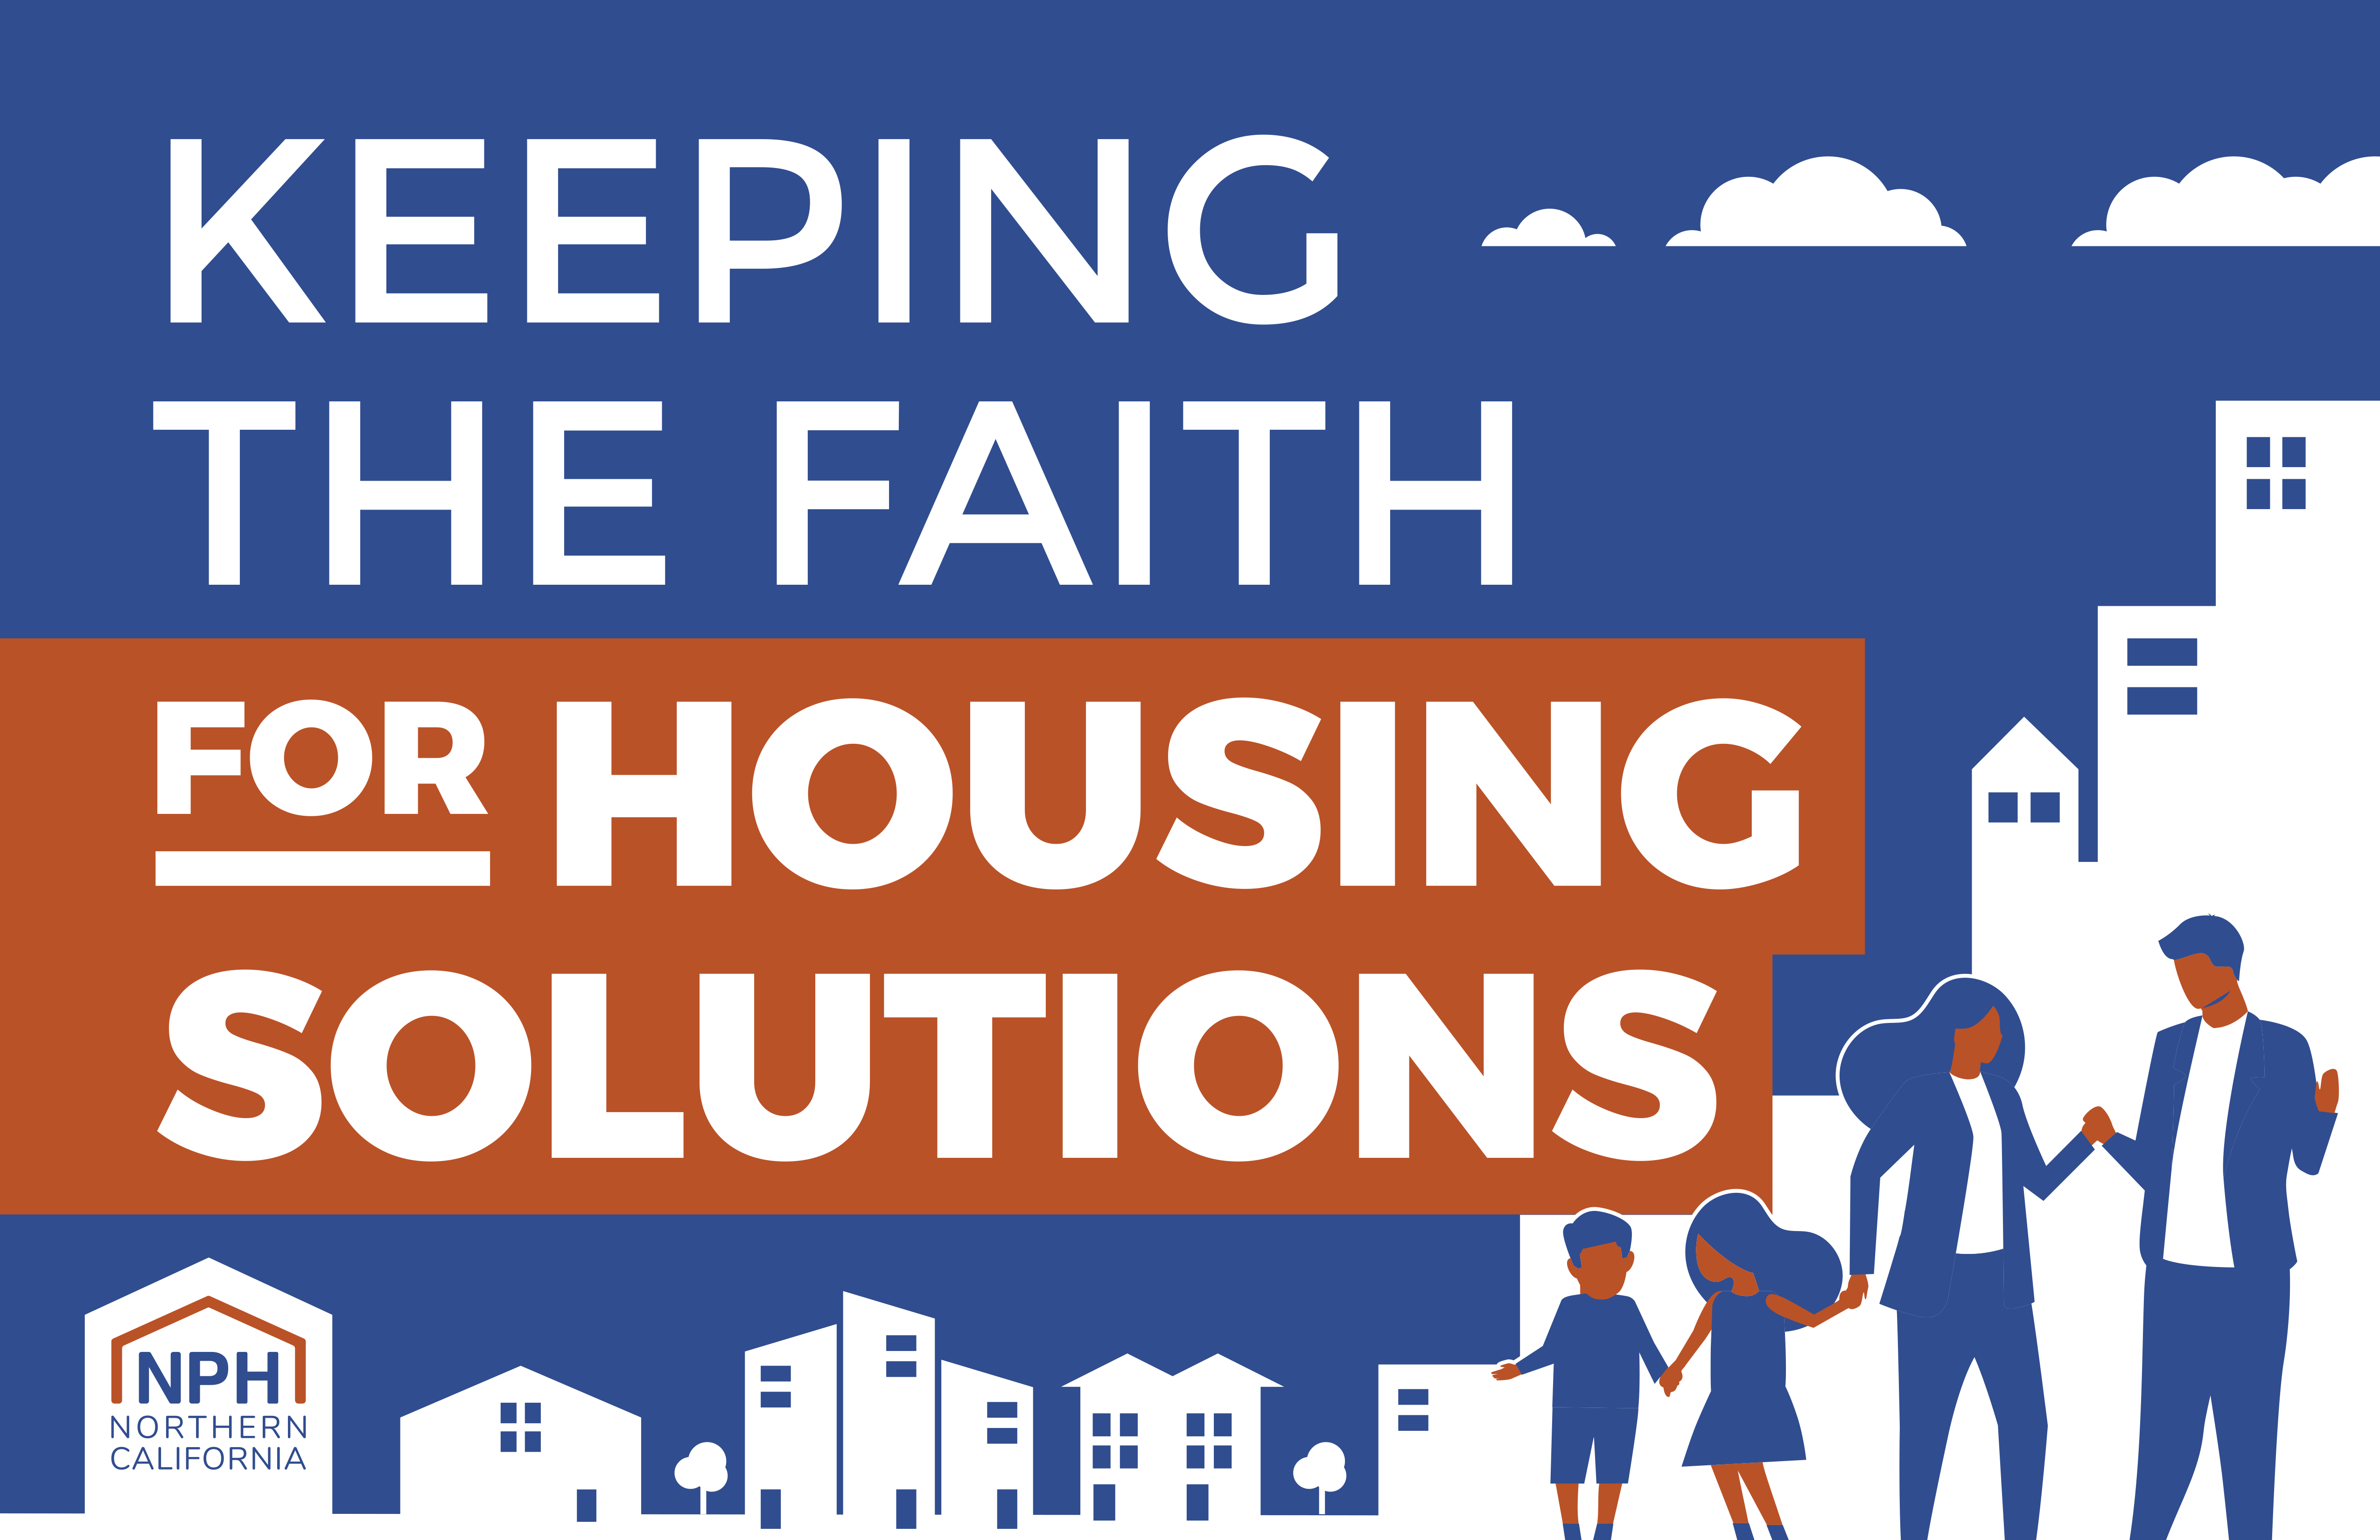 SB 4 flyer that says Keeping the Faith for Housing Solutions